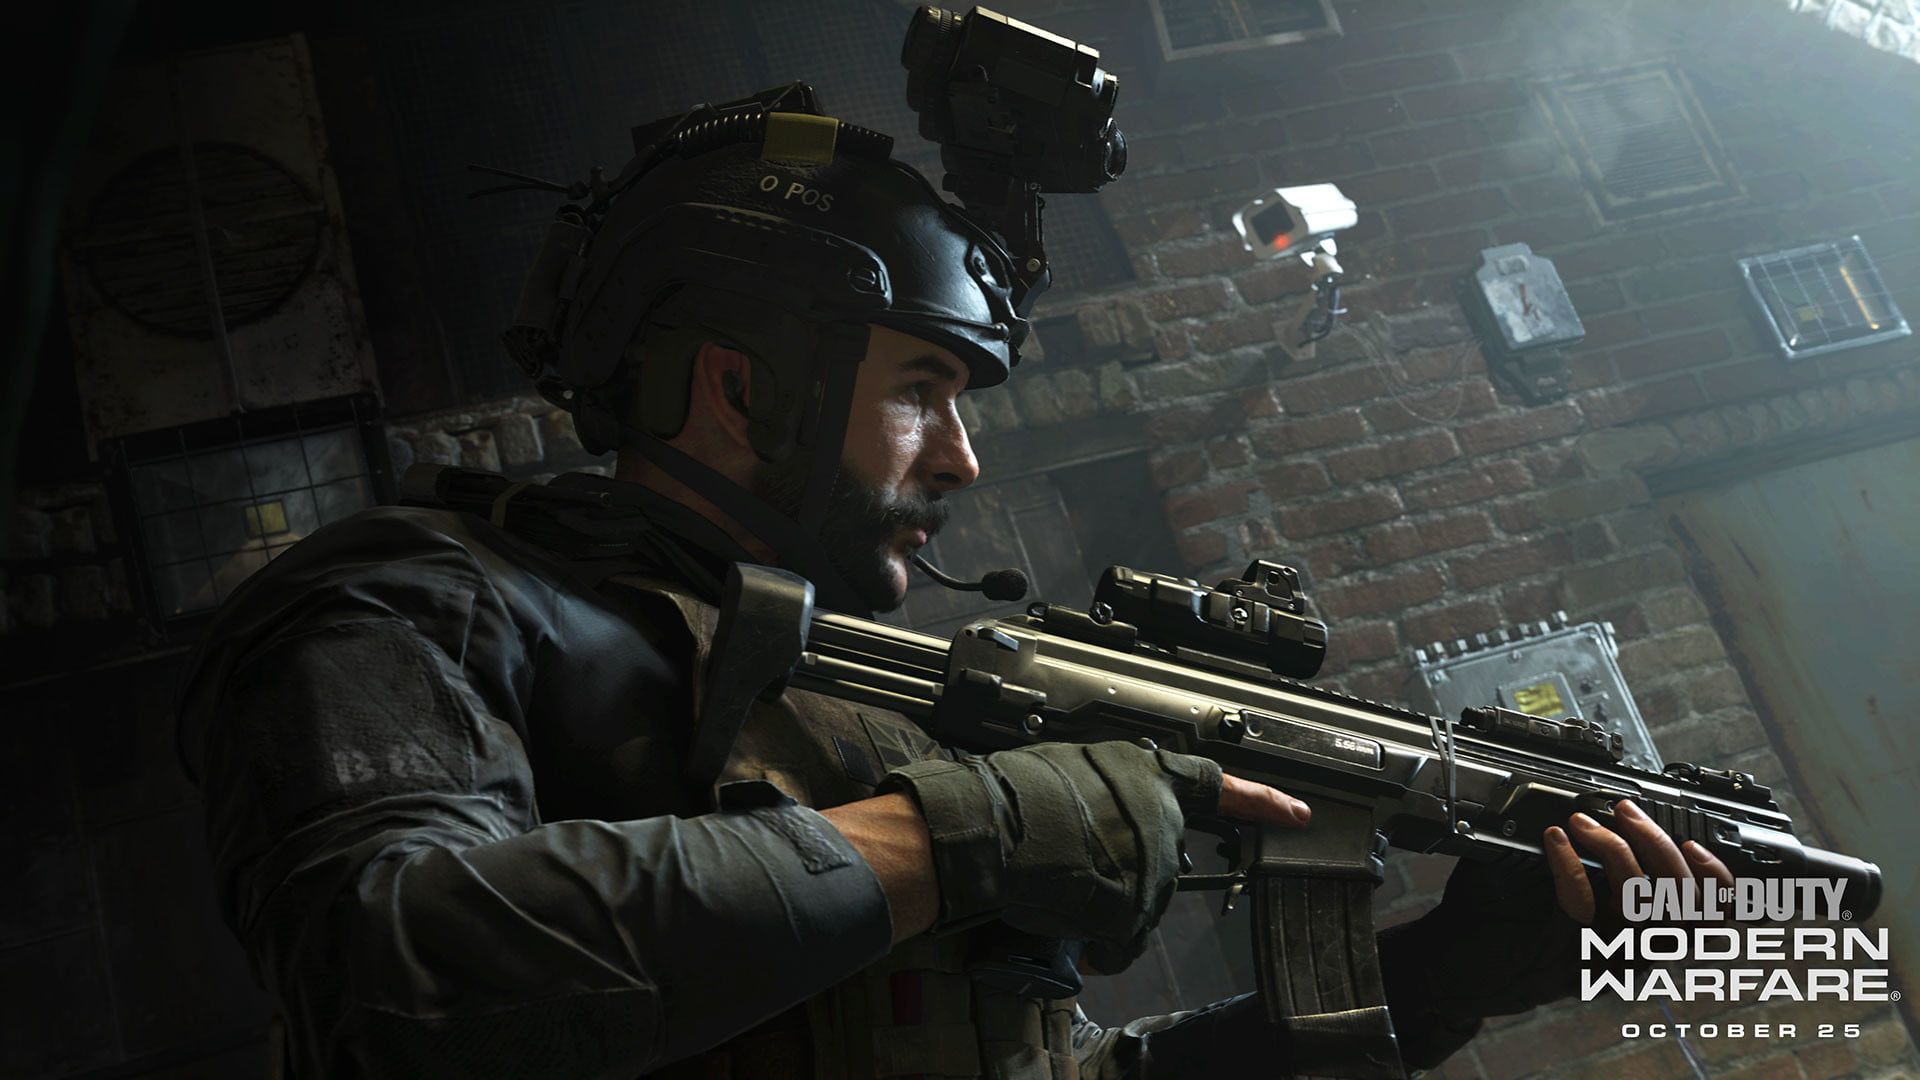 Call of Duty: Modern Warfare Hints at Warzone Release Date